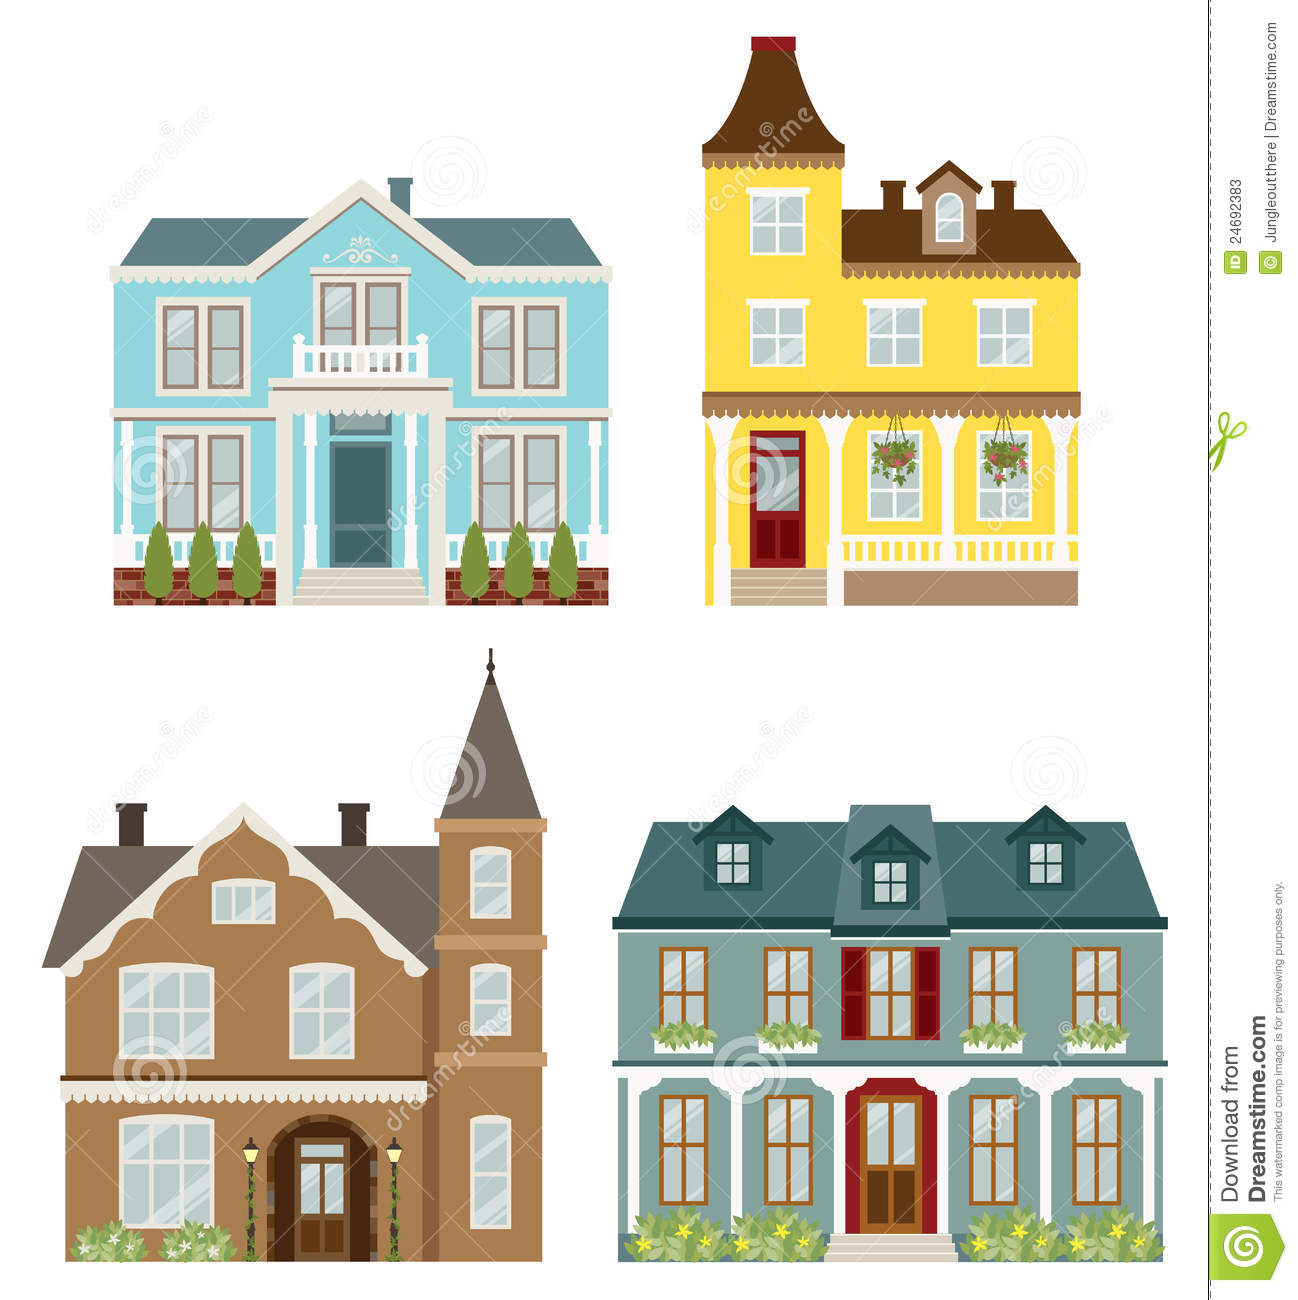 Victorian Houses Stock Photos   Image  24692383